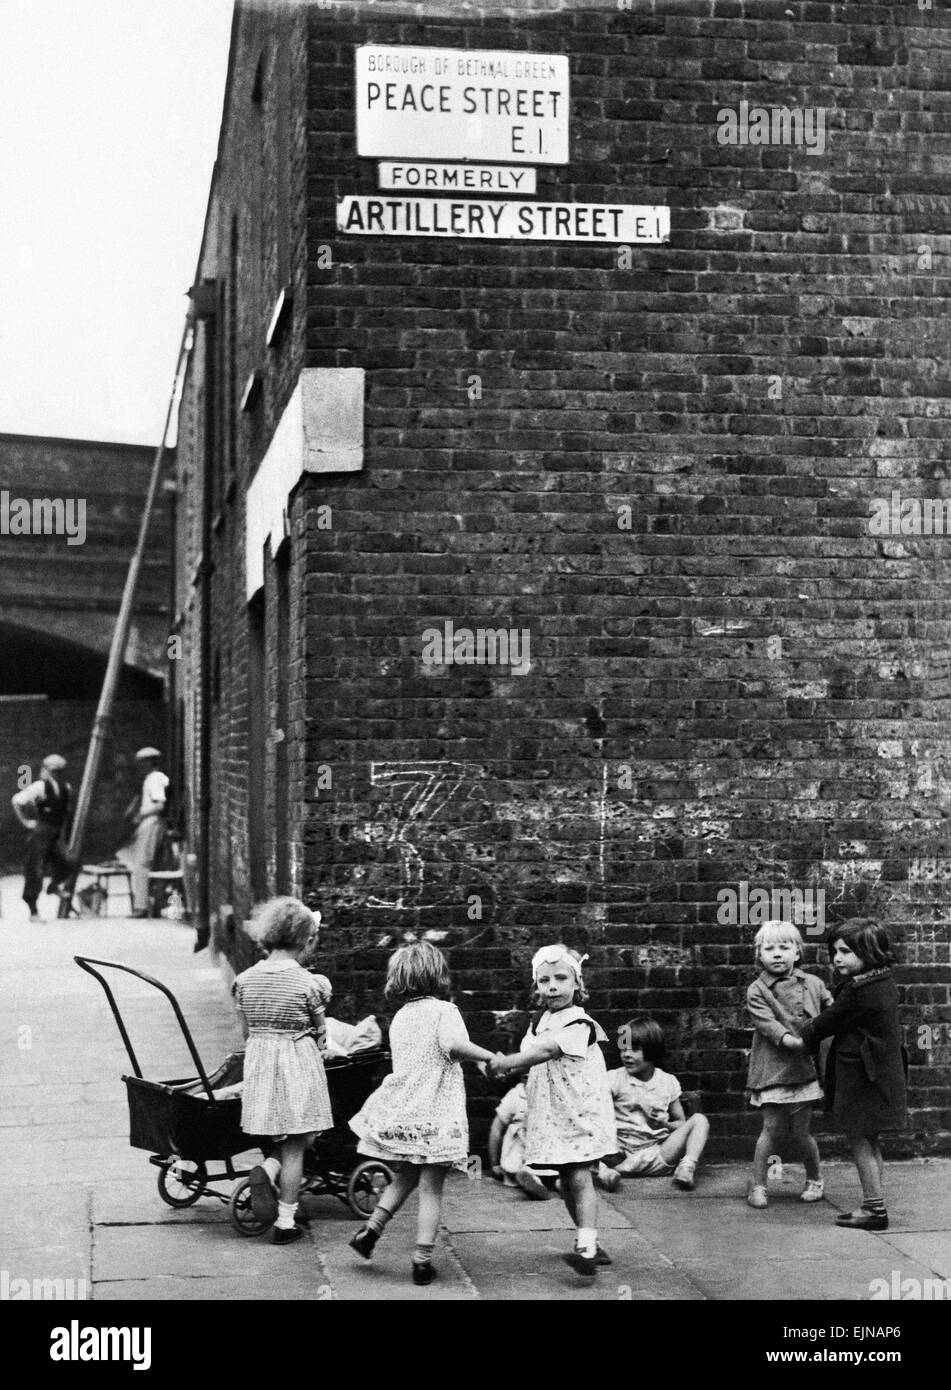 Young girls playing mums with their dolls and toy prams on the corner of Peace Street, formerly Artillery Street, in Bethnal Green, East London. 24th July 1939. Stock Photo